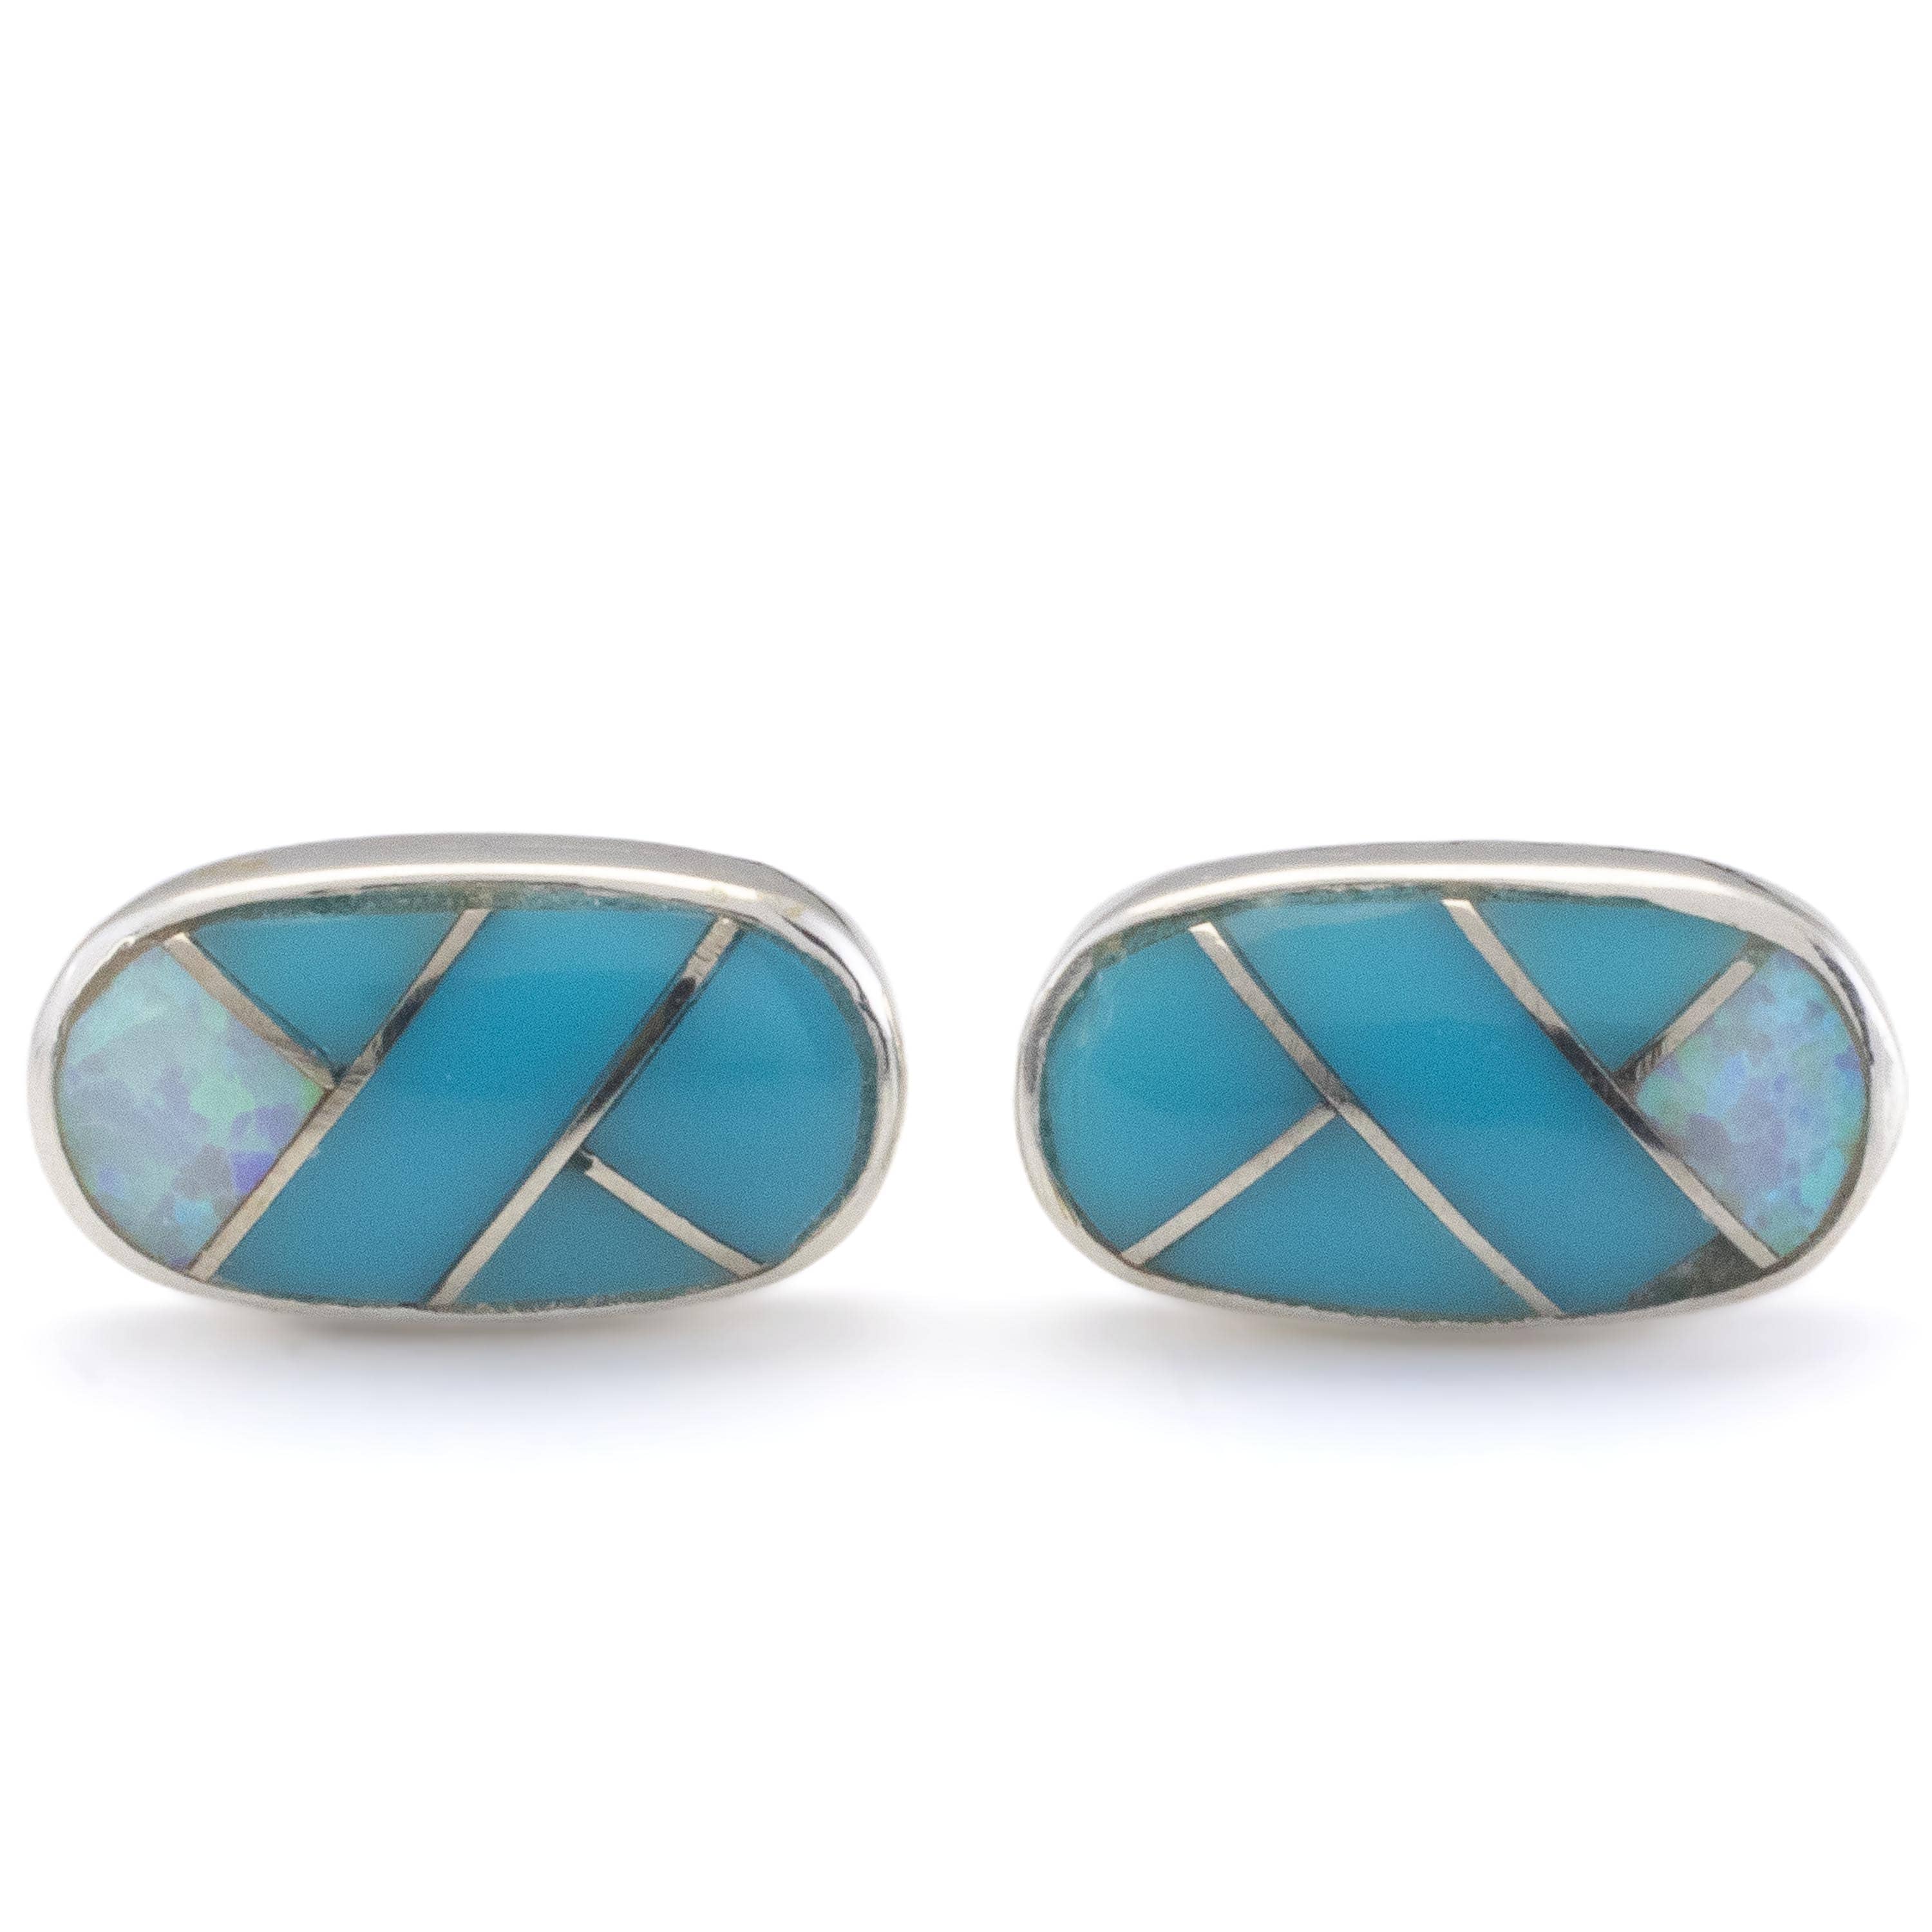 Kalifano Southwest Silver Jewelry Turquoise Oval Earrings Handmade with Sterling Silver and Opal Accent NME.2238.TQ